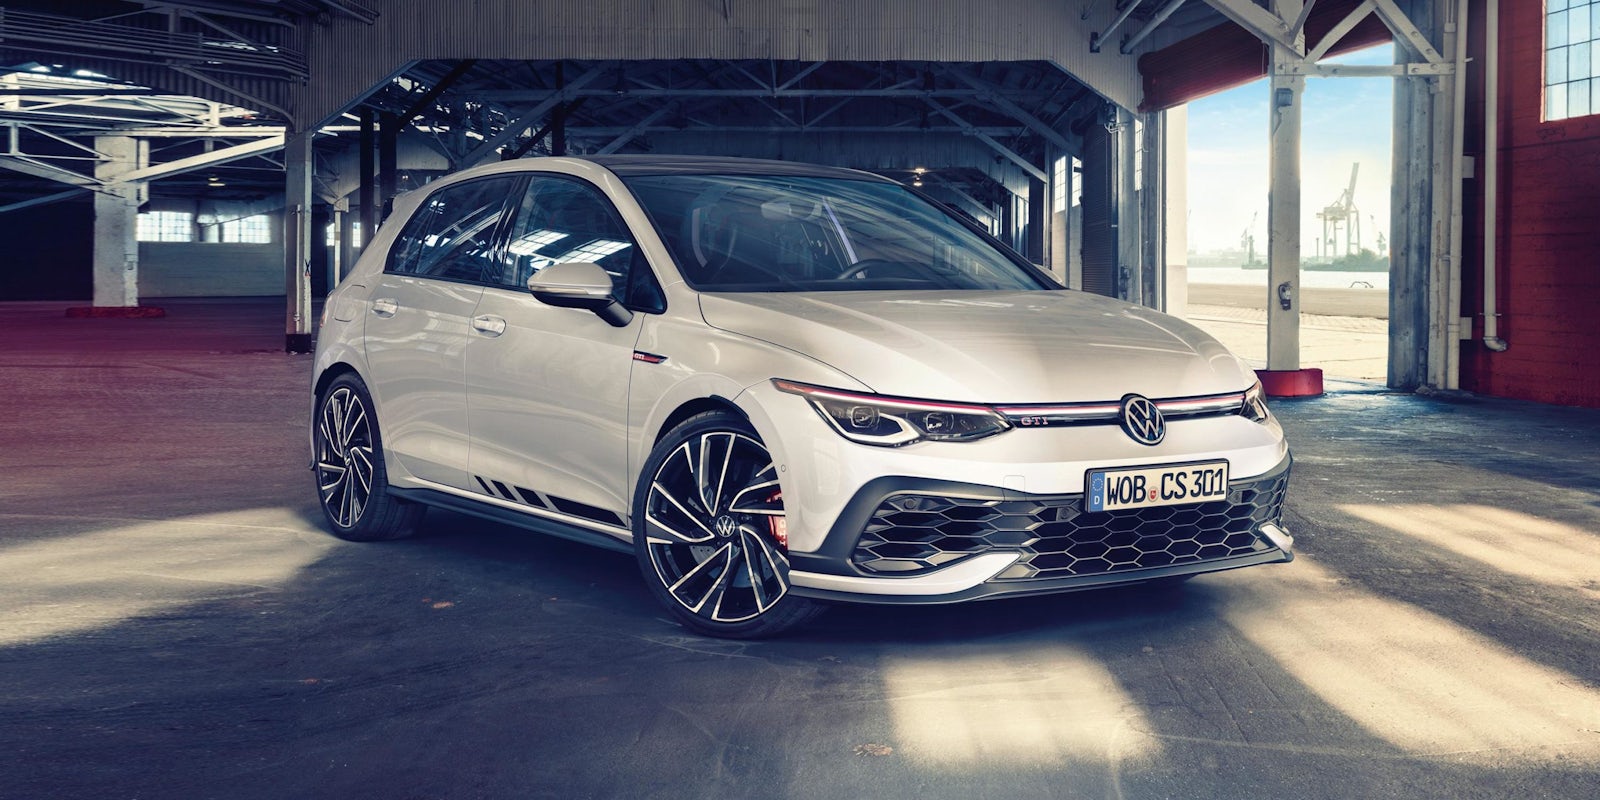 New 300hp Vw Golf Gti Clubsport On Sale Now Price And Specs Revealed Carwow